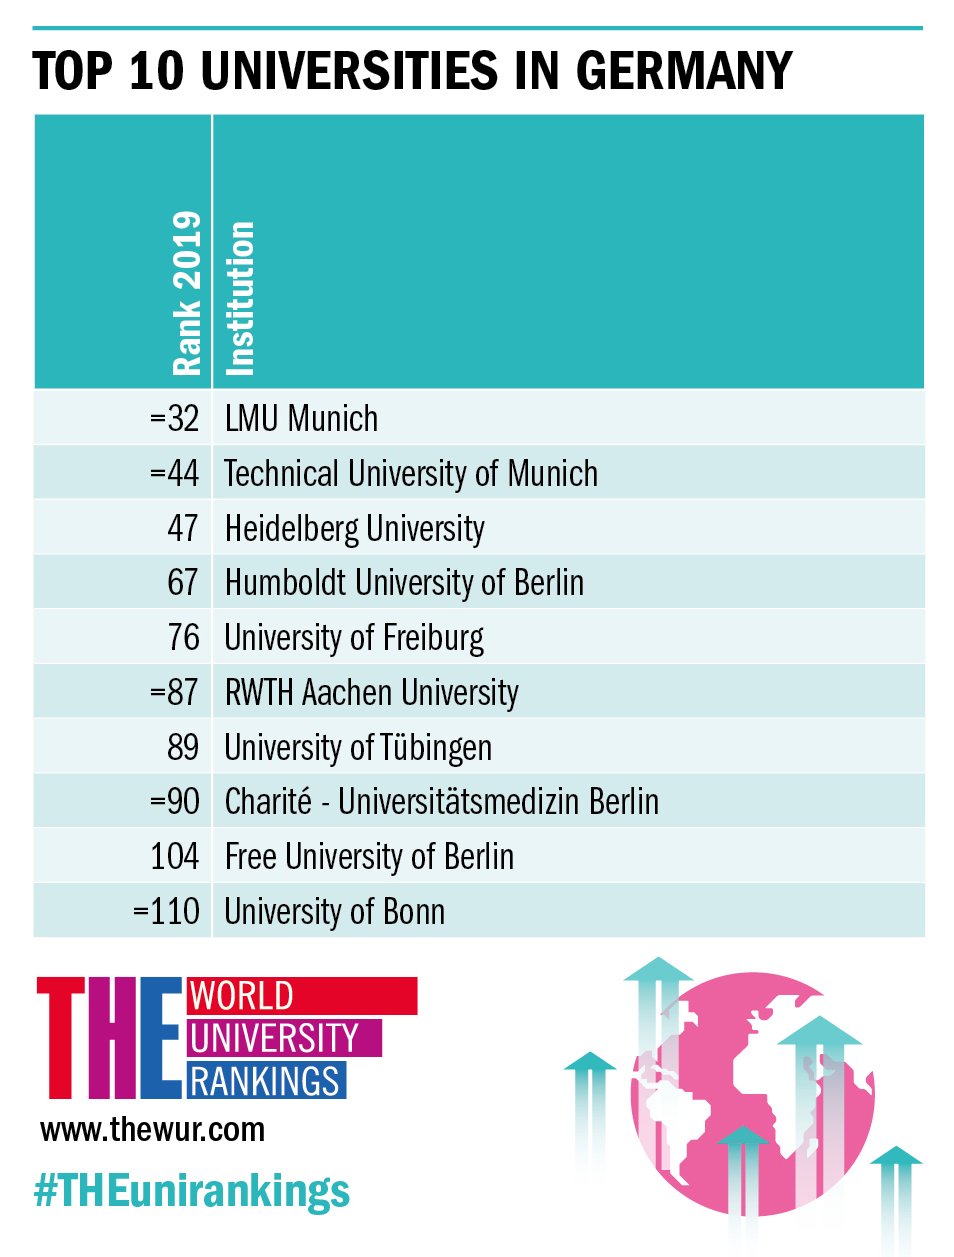 detail Citron Let at læse World University Rankings on Twitter: "Top universities in Germany in our  2019 World University Rankings https://t.co/DjU29RehP0 #THEunirankings  https://t.co/h4gAvFmN1b" / Twitter